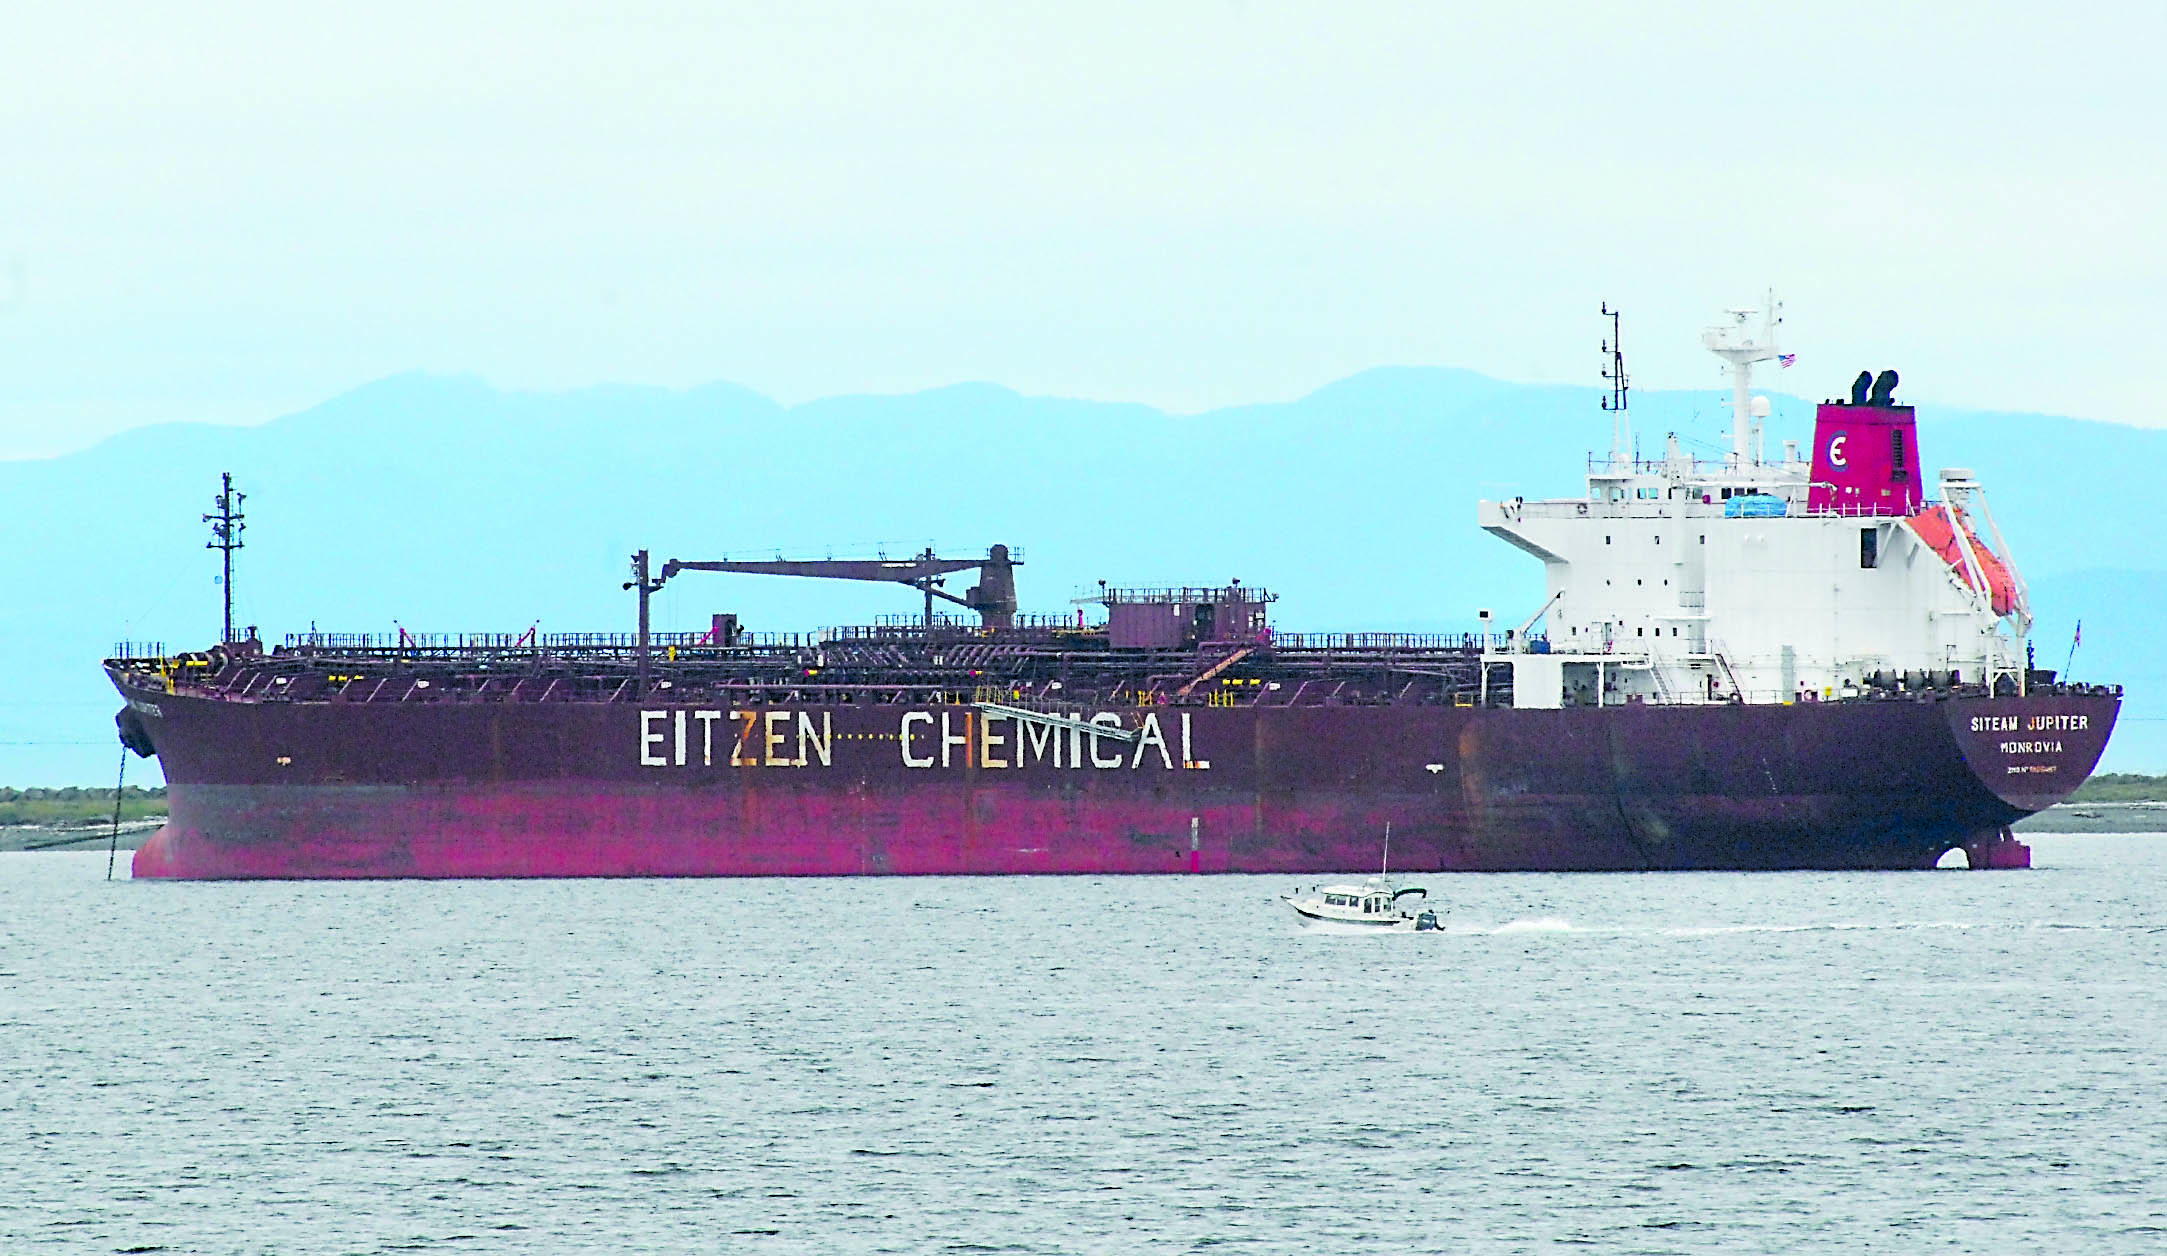 The 594-foot Siteam Jupiter rests at anchor in Port Angeles Harbor following her UWILD while moored last week.  -- Photo by Keith Thorpe/Peninsula Daily News